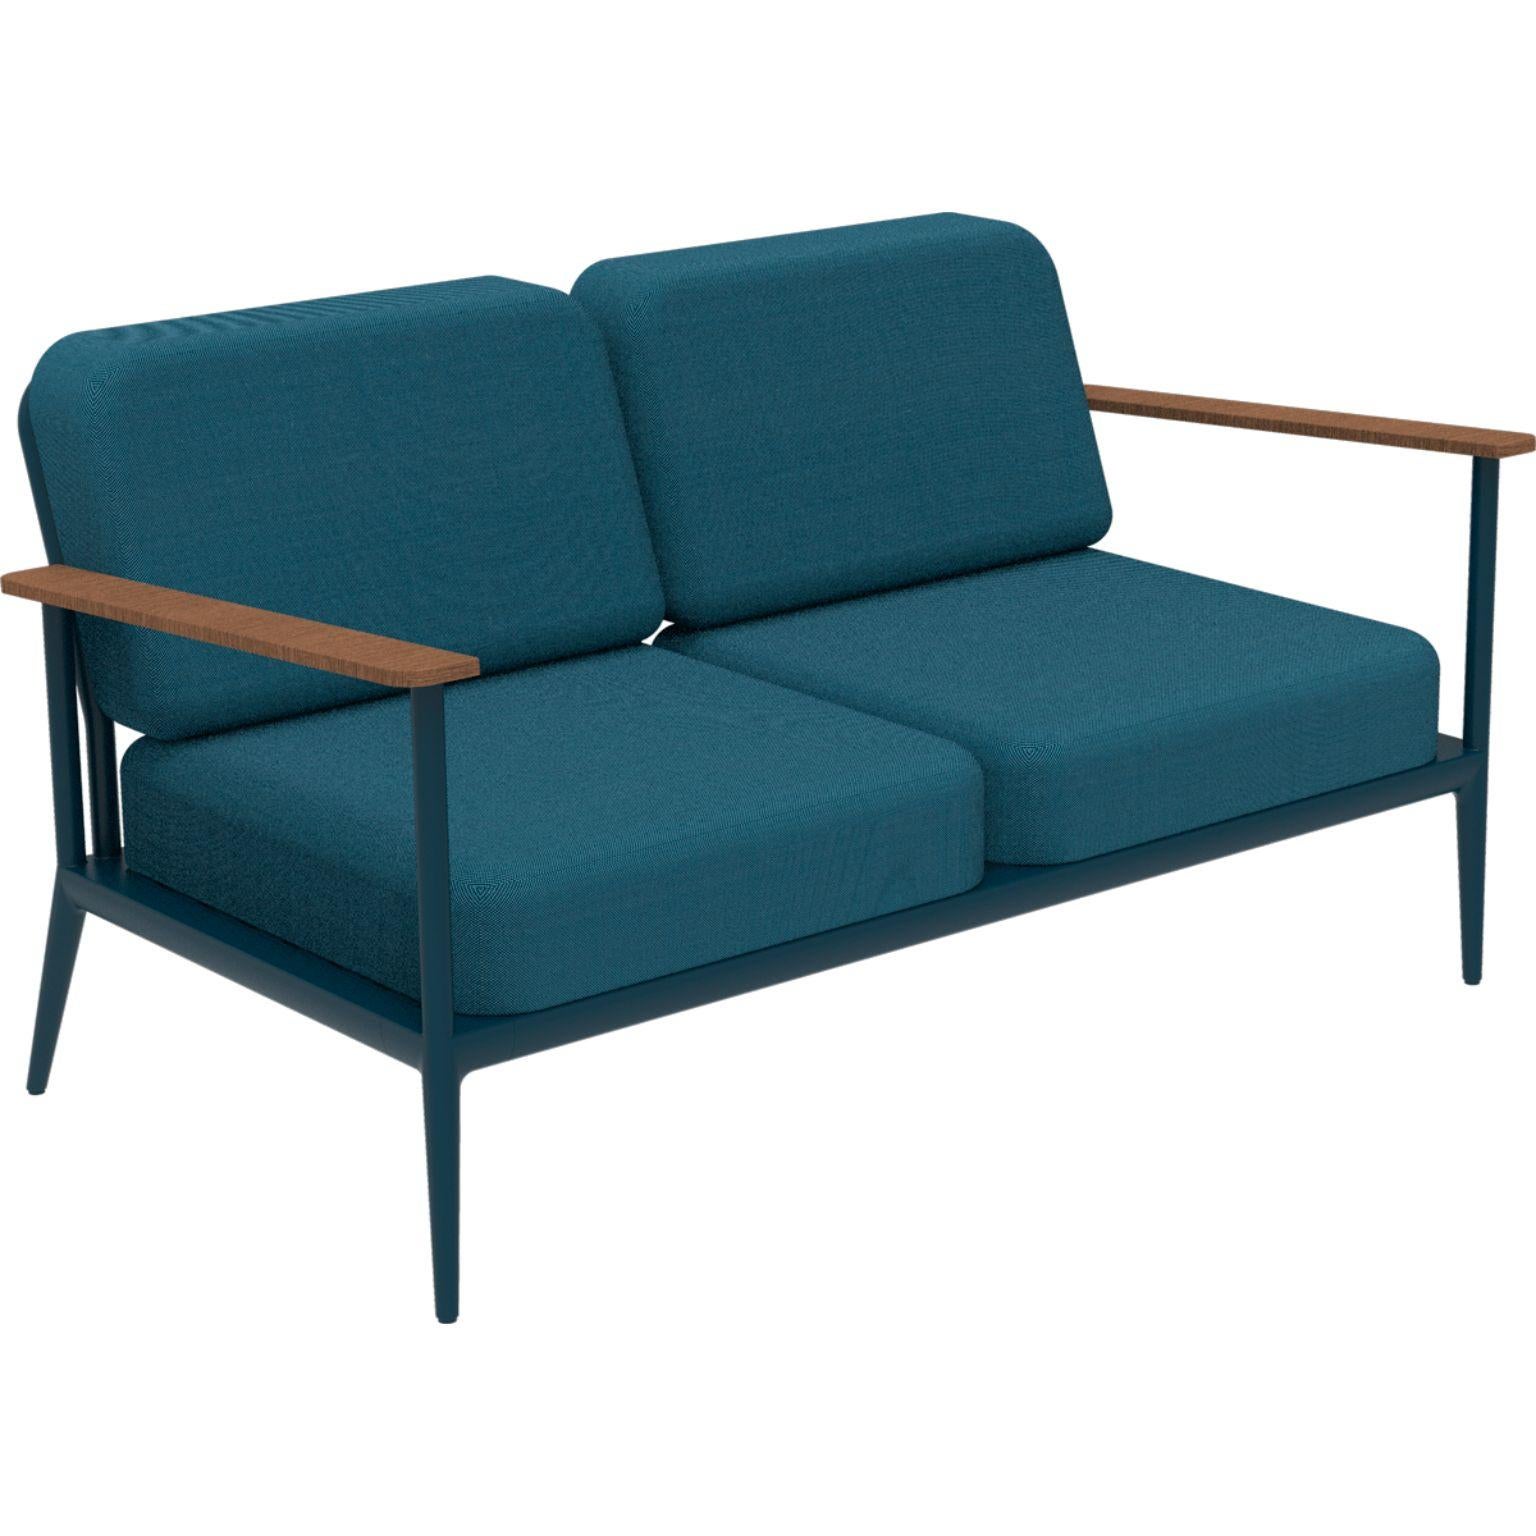 Nature Navy sofa by MOWEE
Dimensions: D85 x W151 x H81 cm (seat height 42 cm).
Material: Aluminum, upholstery and Iroko Wood.
Weight: 32 kg.
Also available in different colors and finishes. 

An unmistakable collection for its beauty and